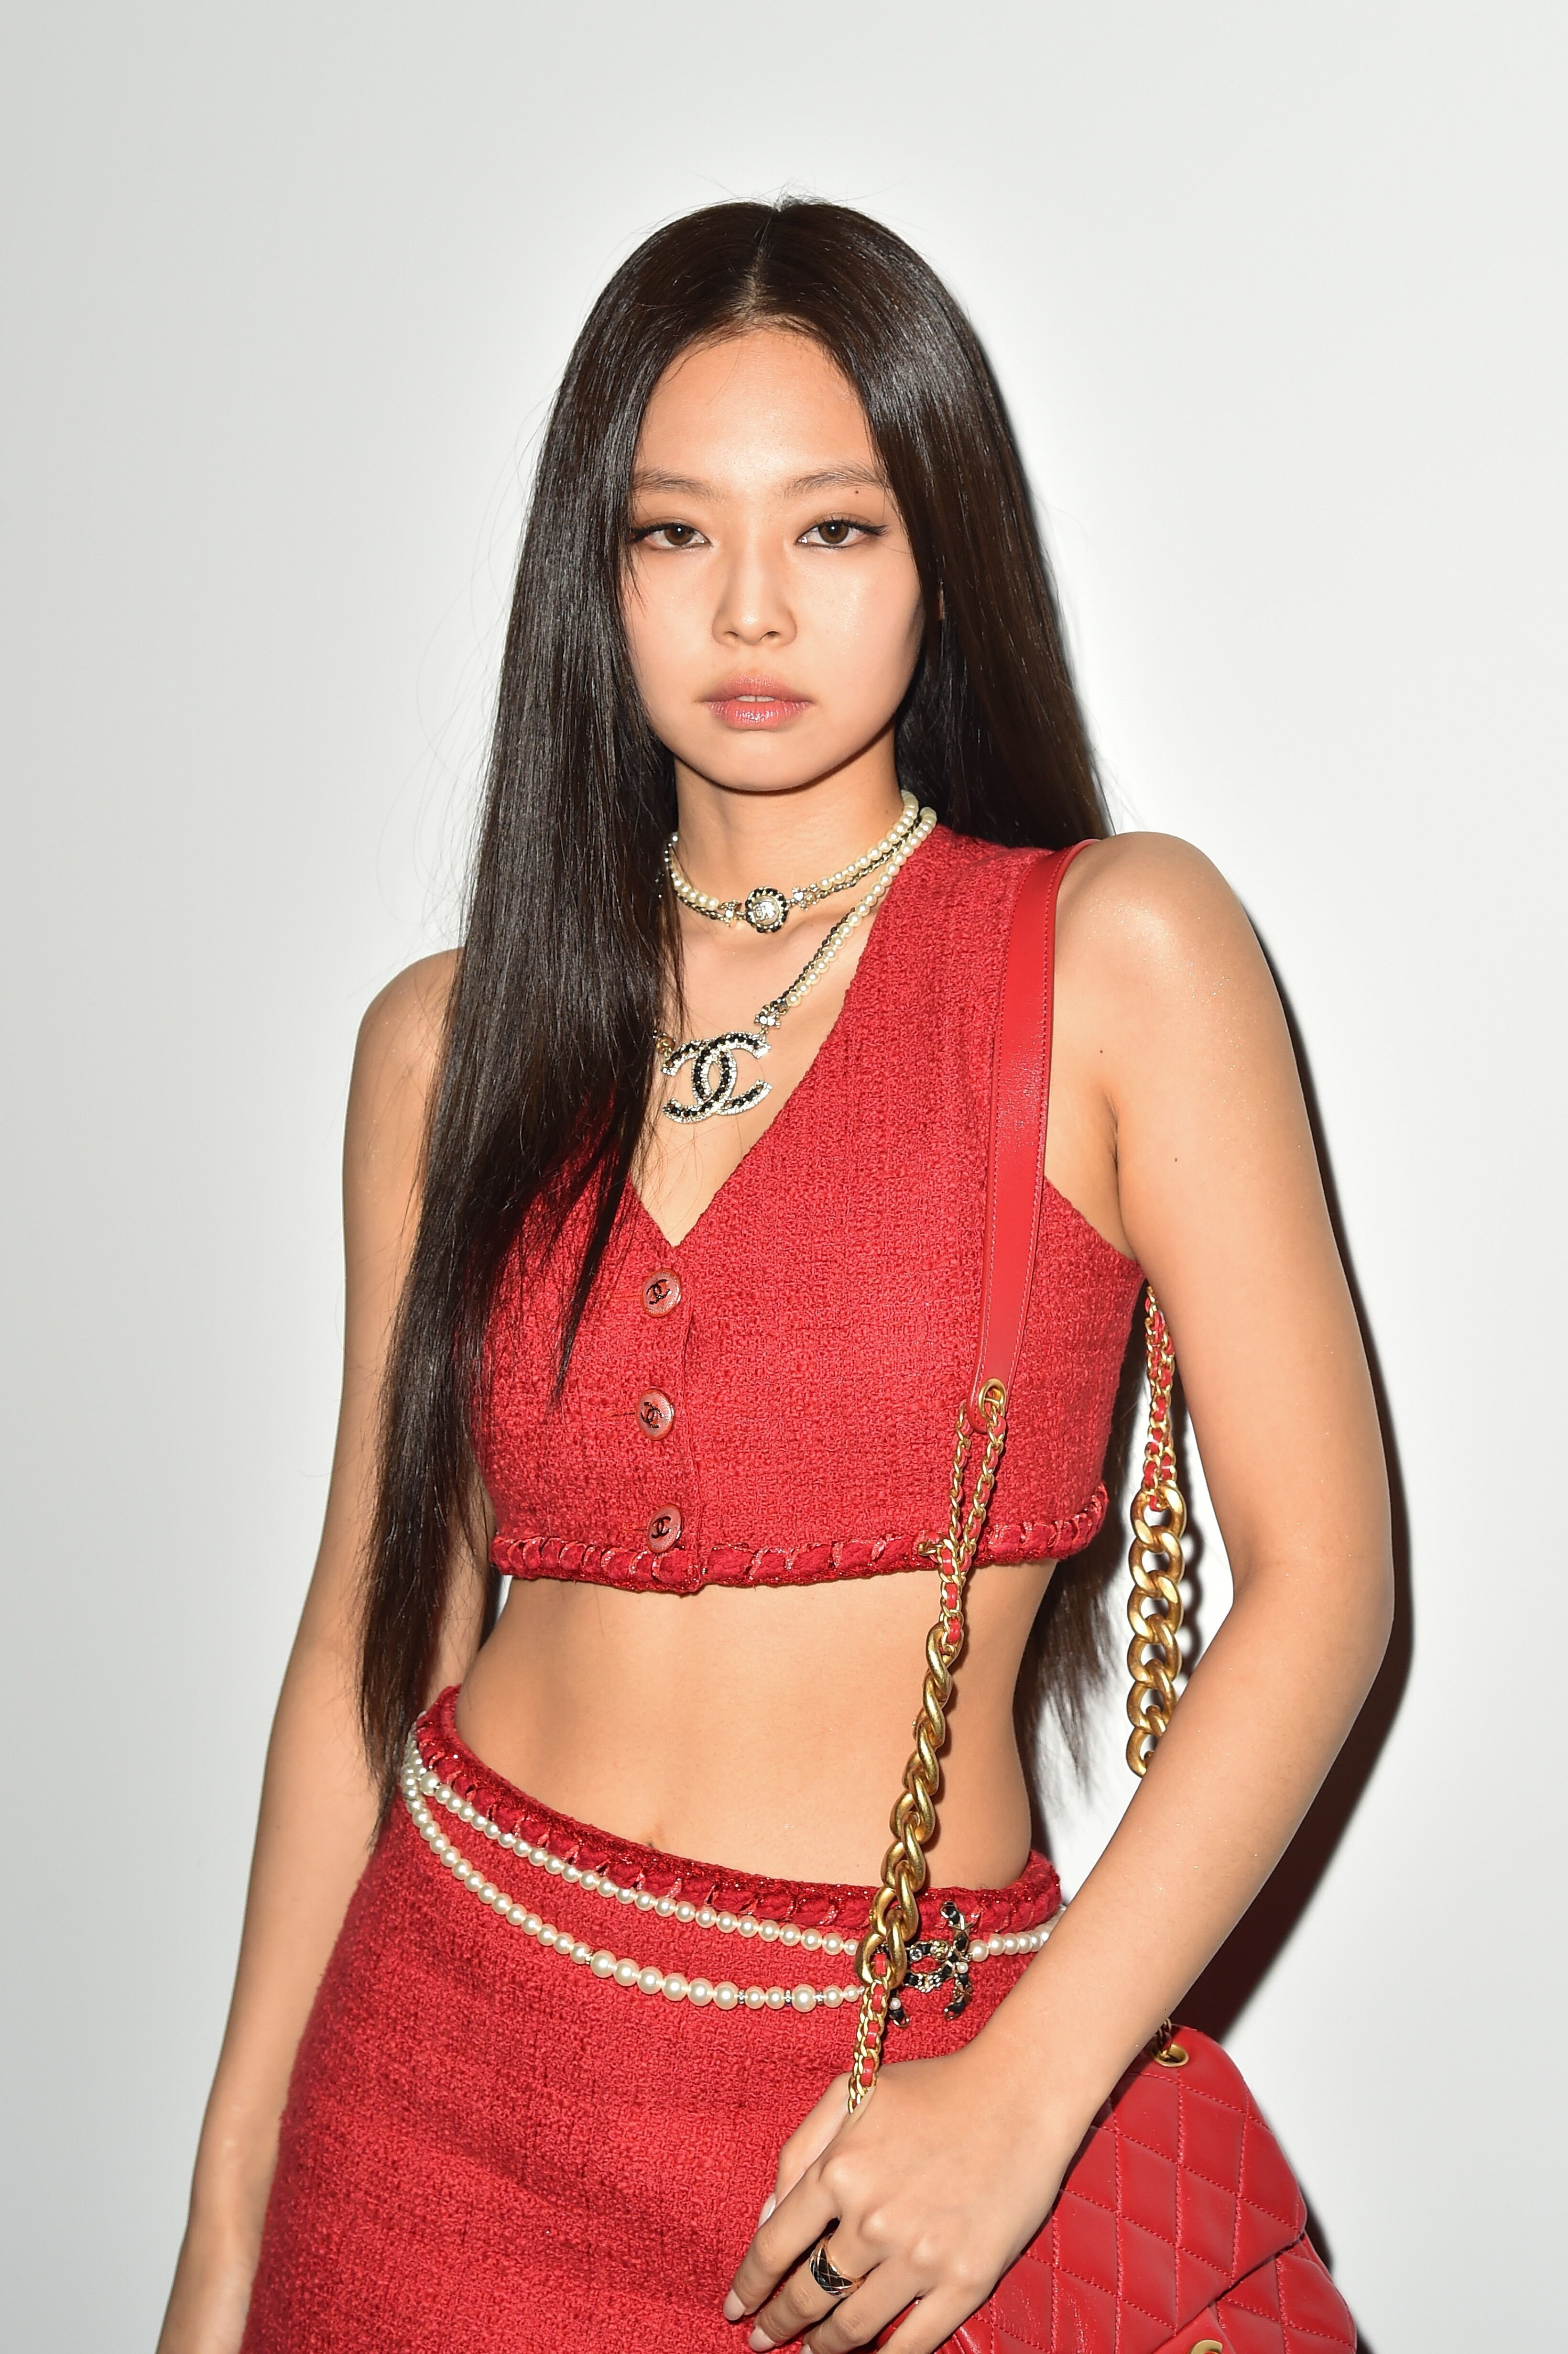 BLACKPINK's Jennie Is The Perfect Fashion Inspiration For Every